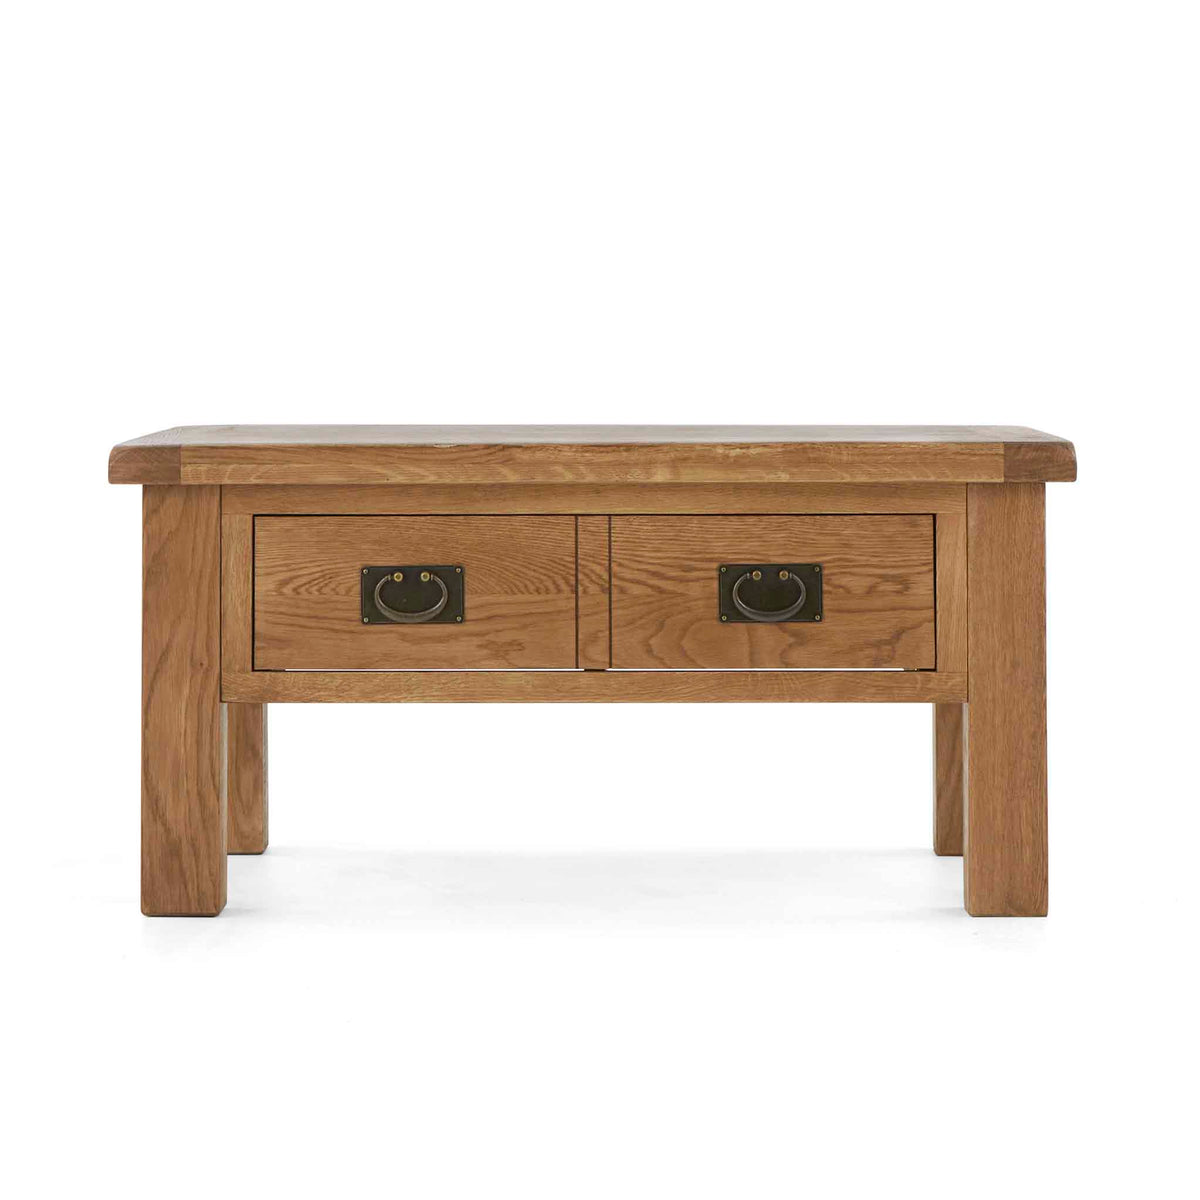 Zelah Oak Coffee Table with Drawer - Front view